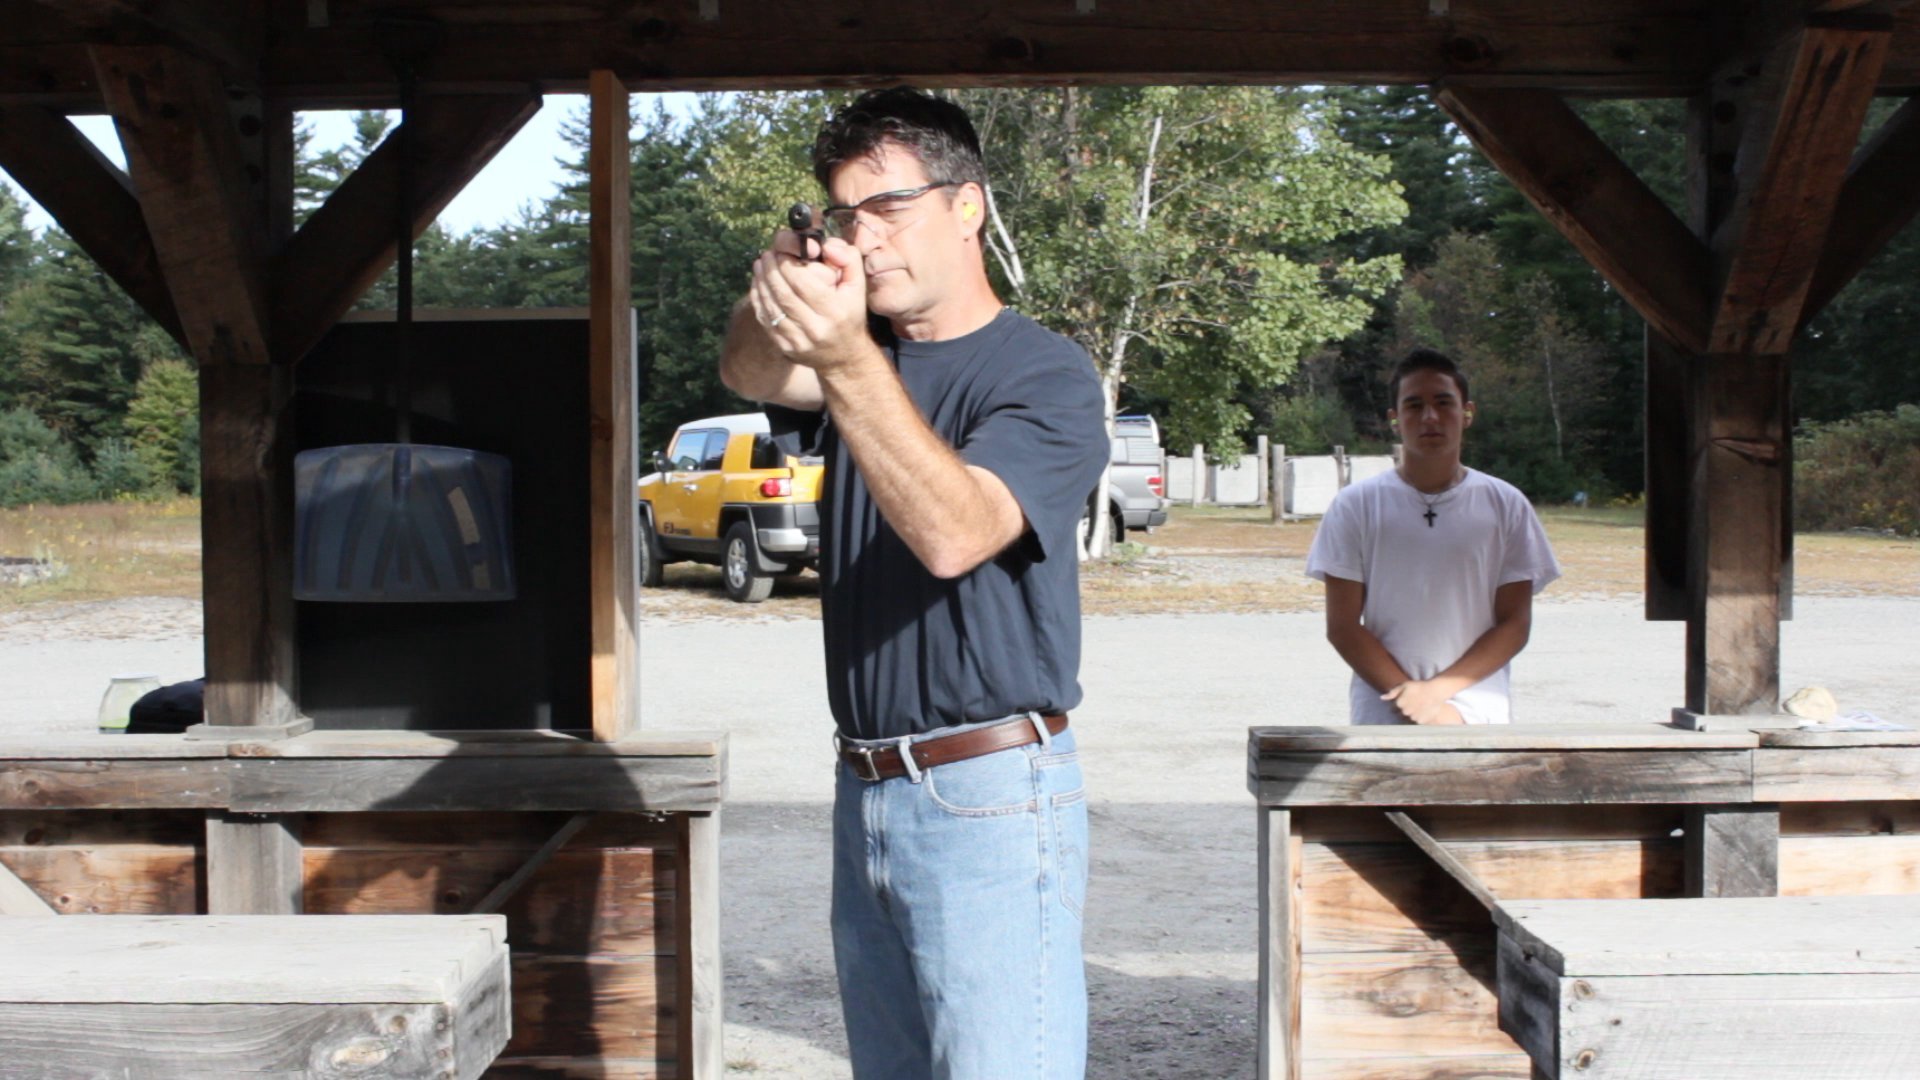 An expert marksman, Henri Miller practices at a shooting range while his son, Gary, watches.